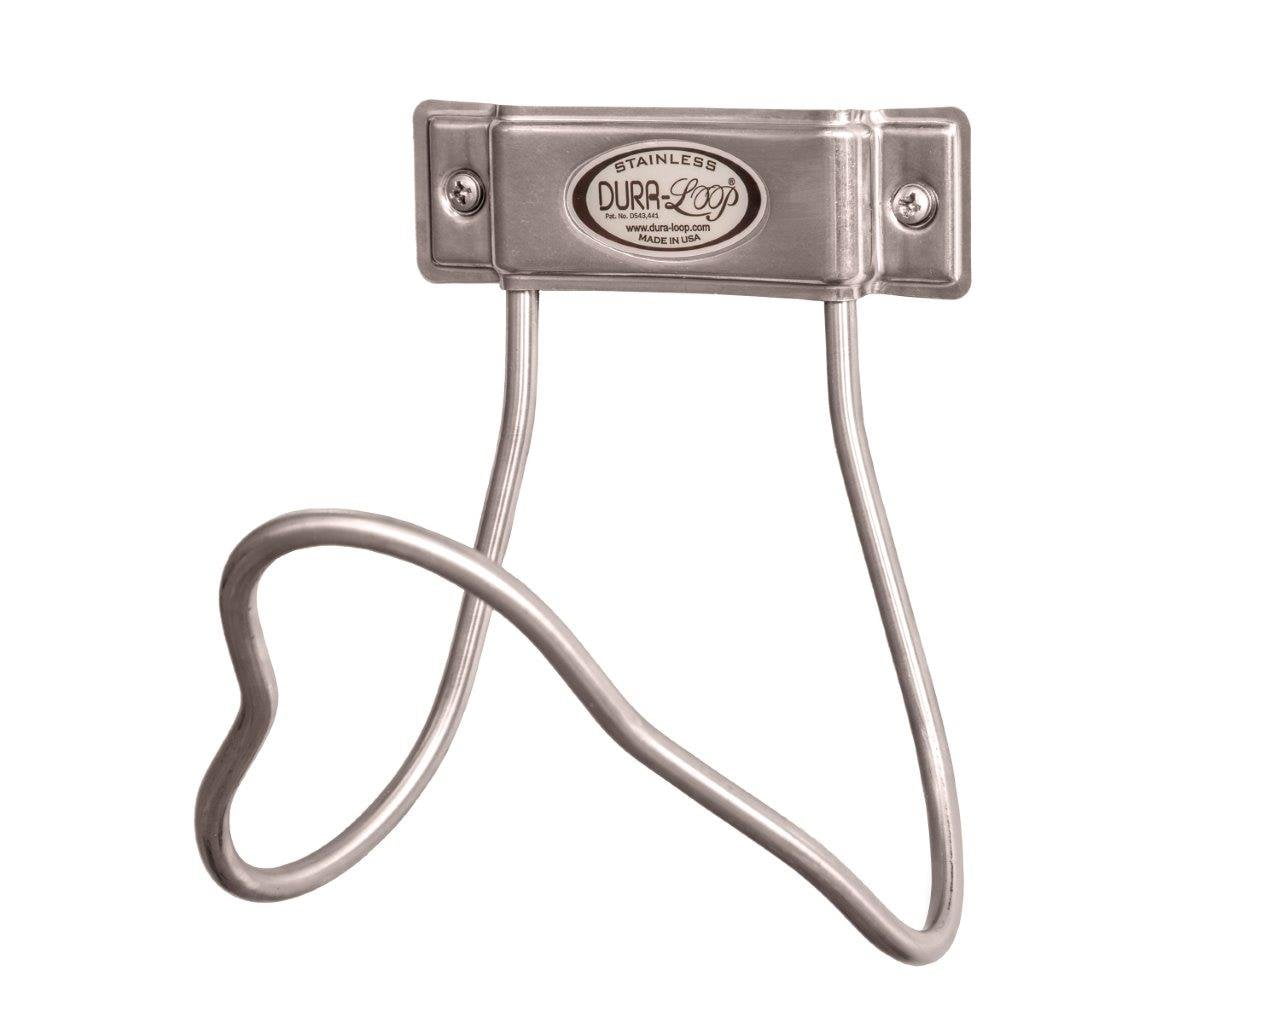 Accu Dura-loop Stainless Steel Water Hose Hanger Small USA Made 1 for sale online